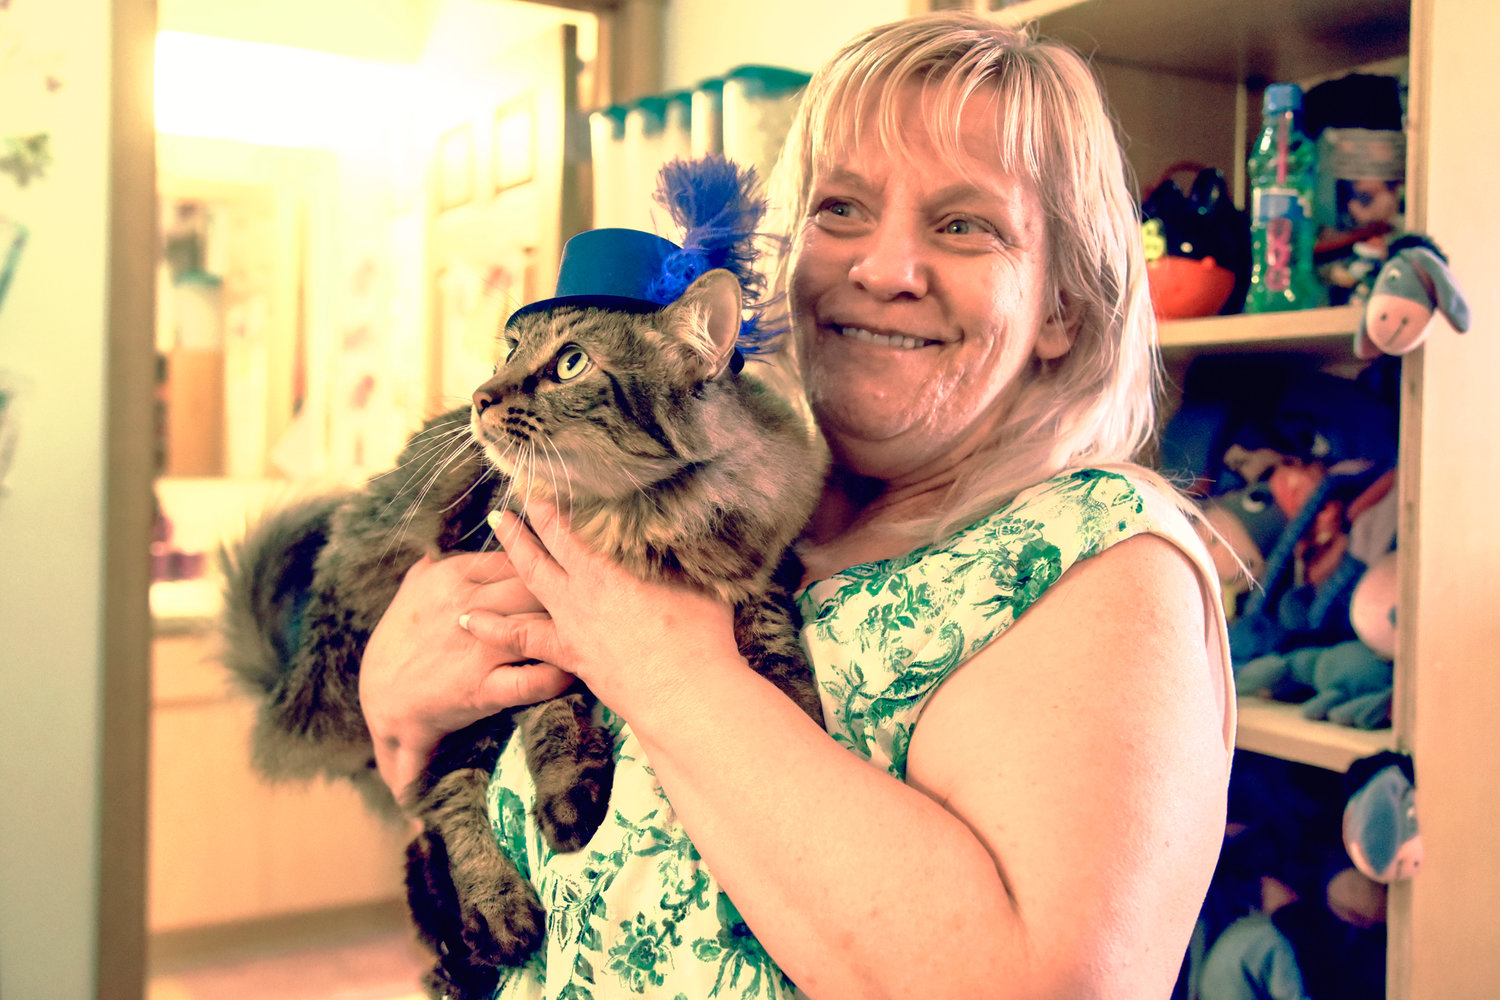 Debbie Nix smiles while holding her cat KJ as he sports a feathery hat in her Centralia residence.